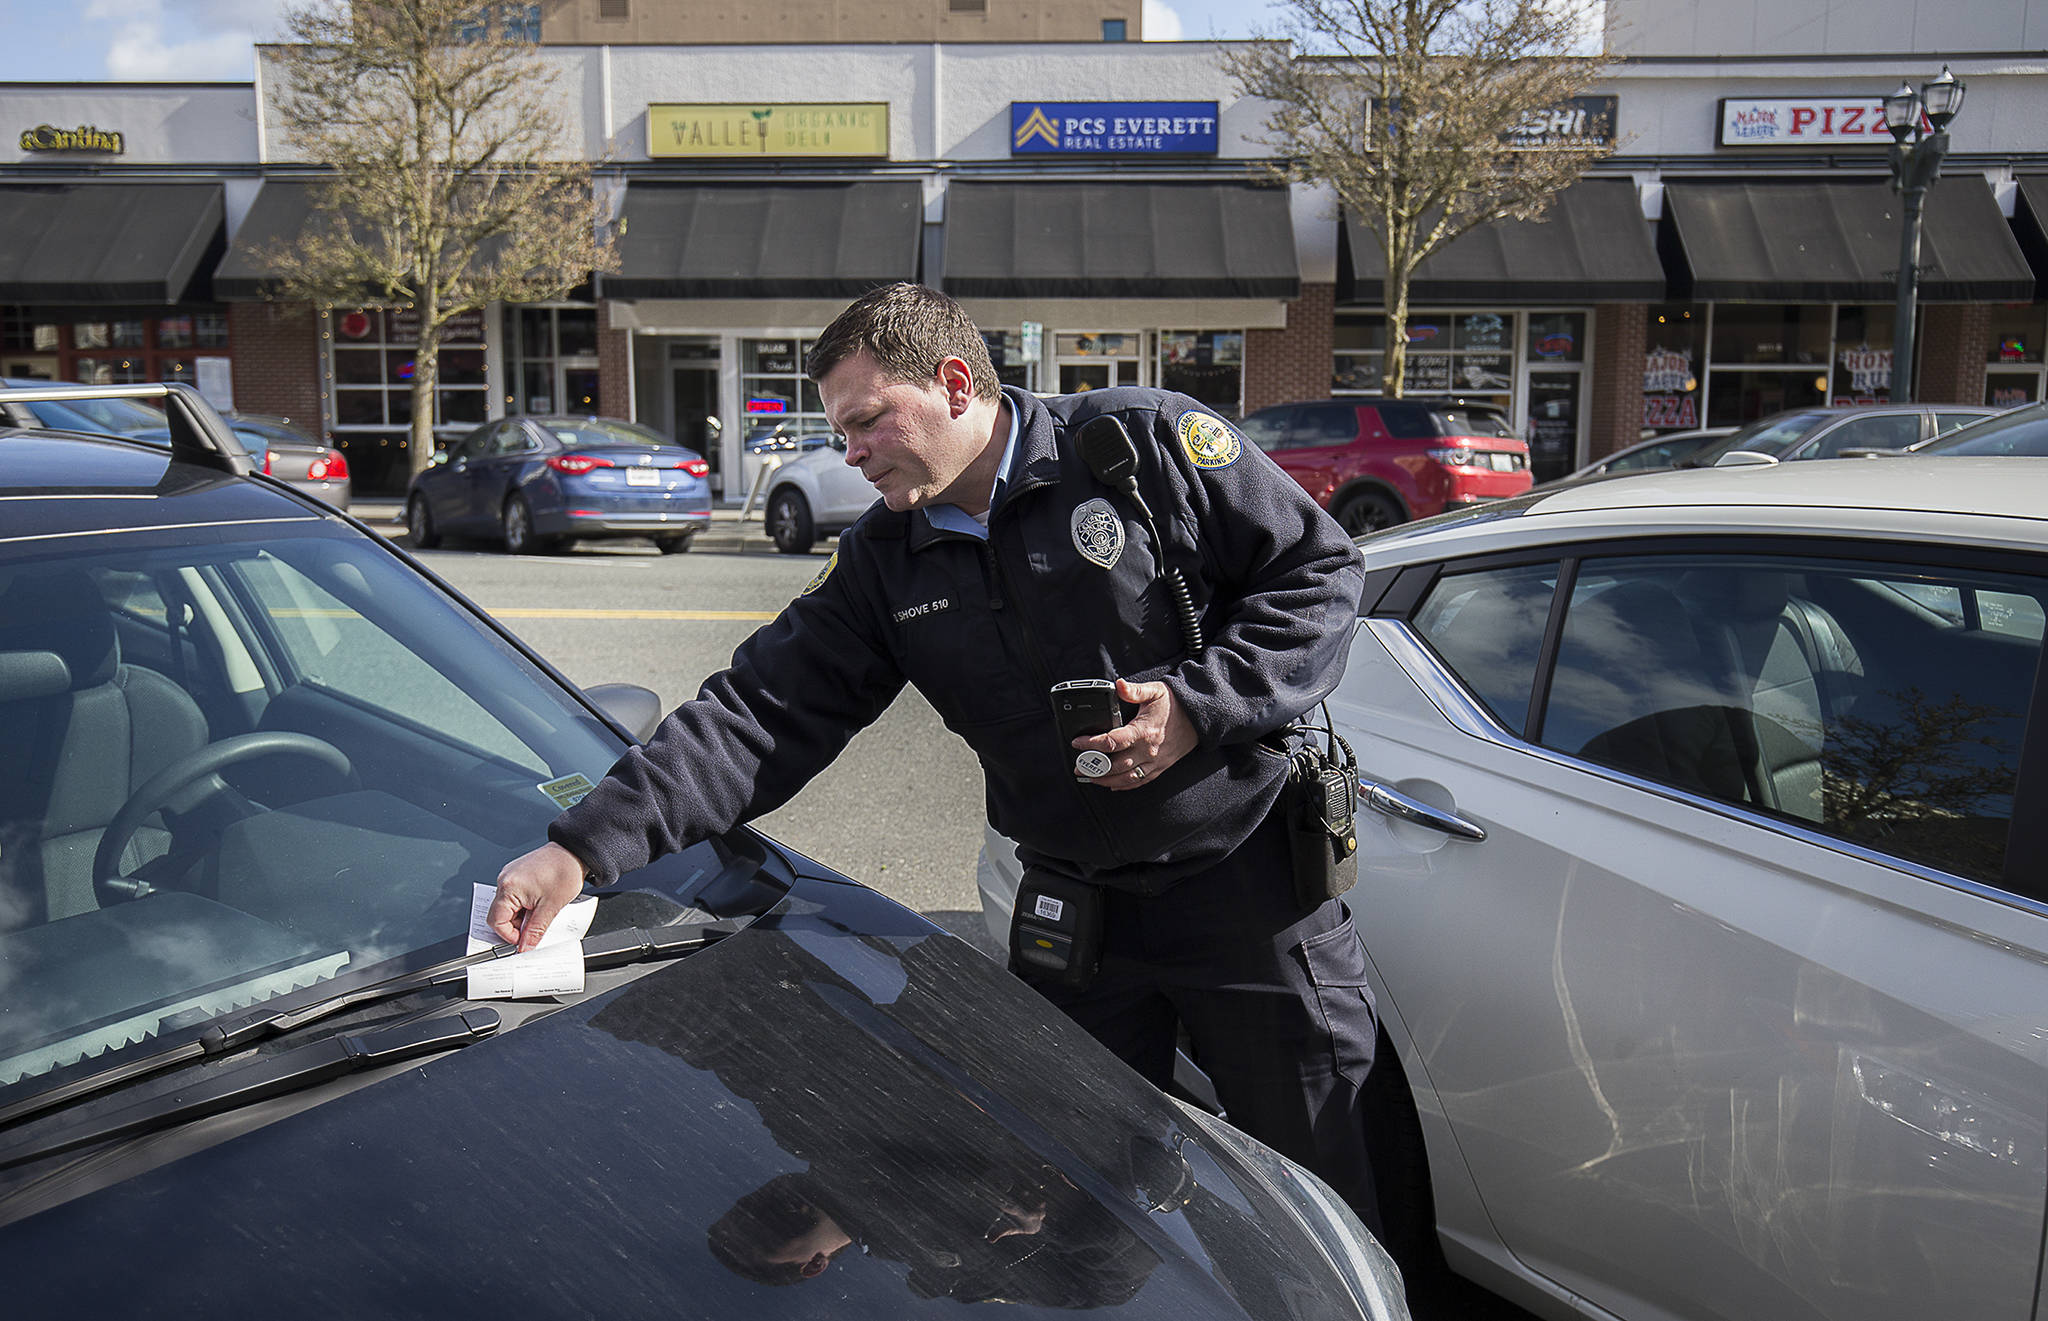 Everett parking enforcement officer Donny Shove puts a ticket on a vehicle for parking over 90 minutes on Colby Avenue on Wednesday in Everett. (Andy Bronson / The Herald)